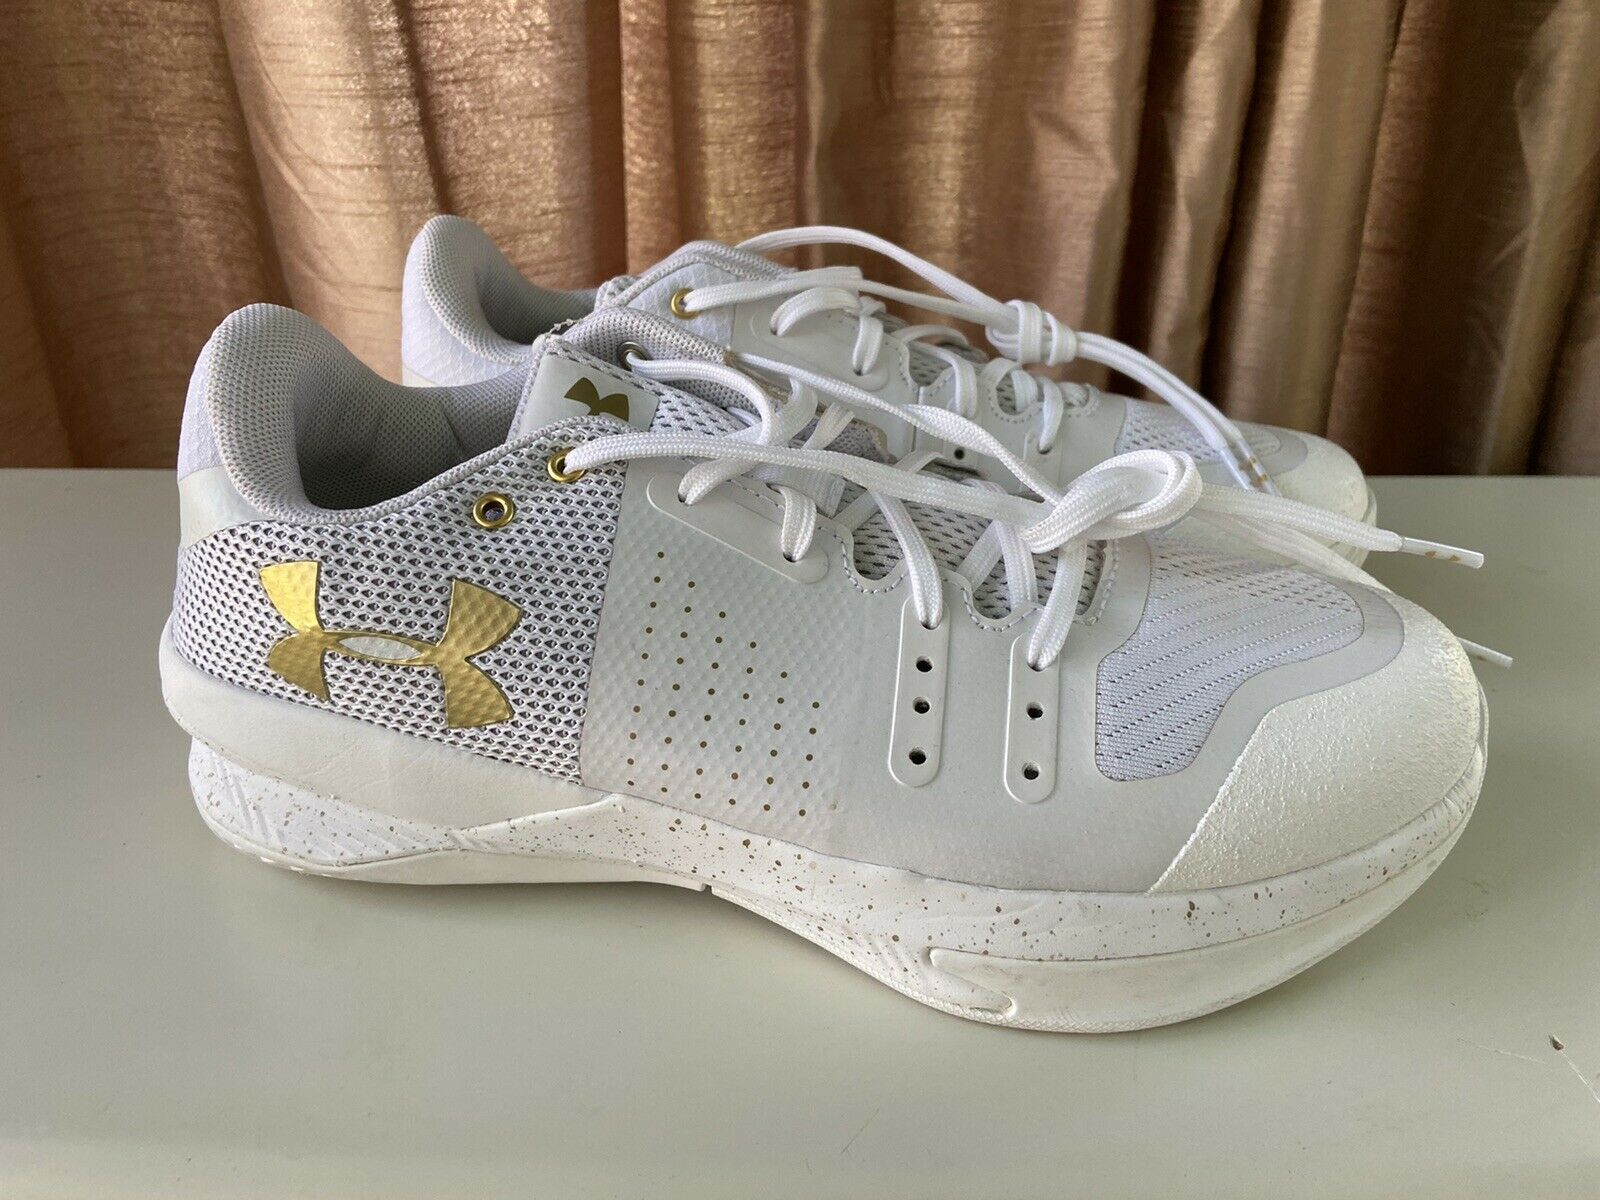 Under Armour Womens White Walking Shoes Size 9 Model 4201611489 NWT